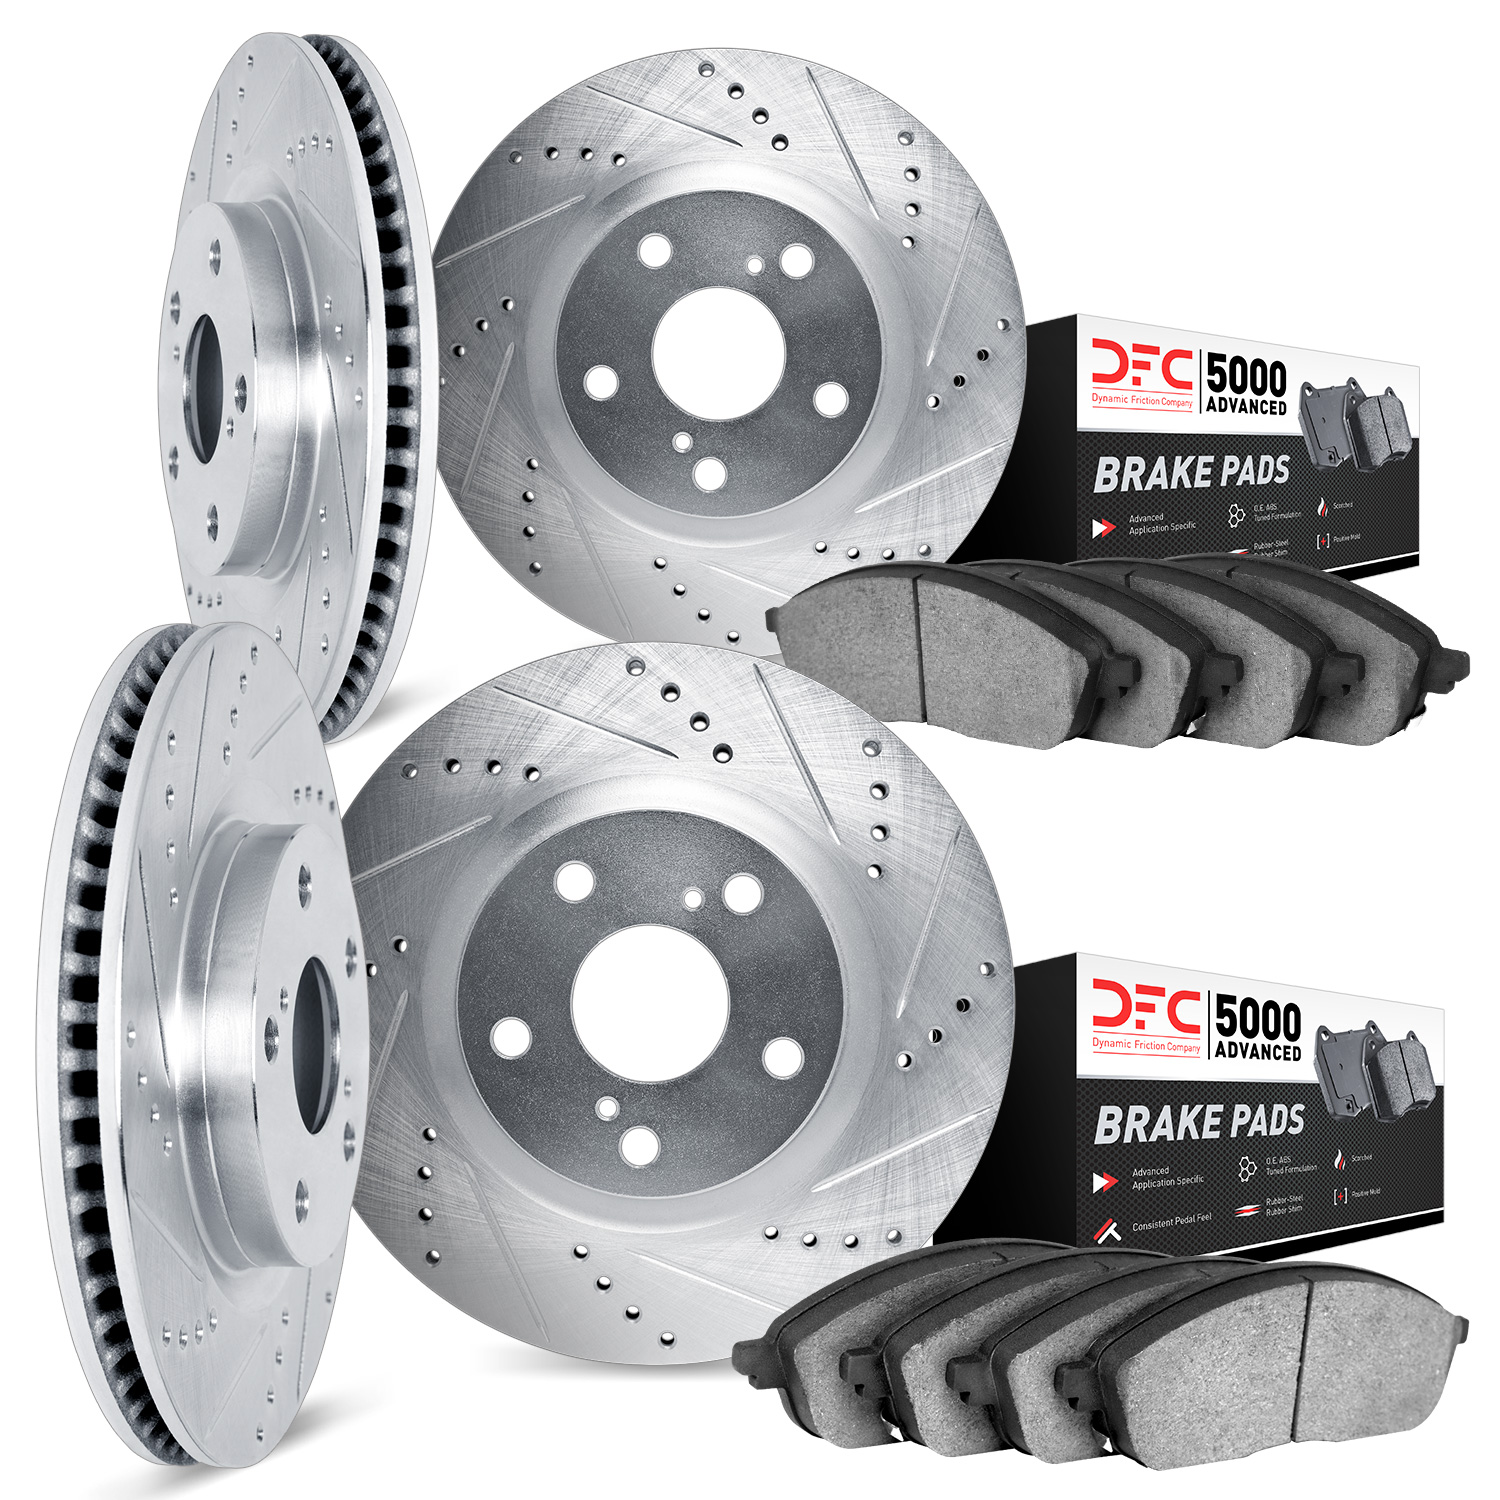 7504-31063 Drilled/Slotted Brake Rotors w/5000 Advanced Brake Pads Kit [Silver], 2010-2011 BMW, Position: Front and Rear